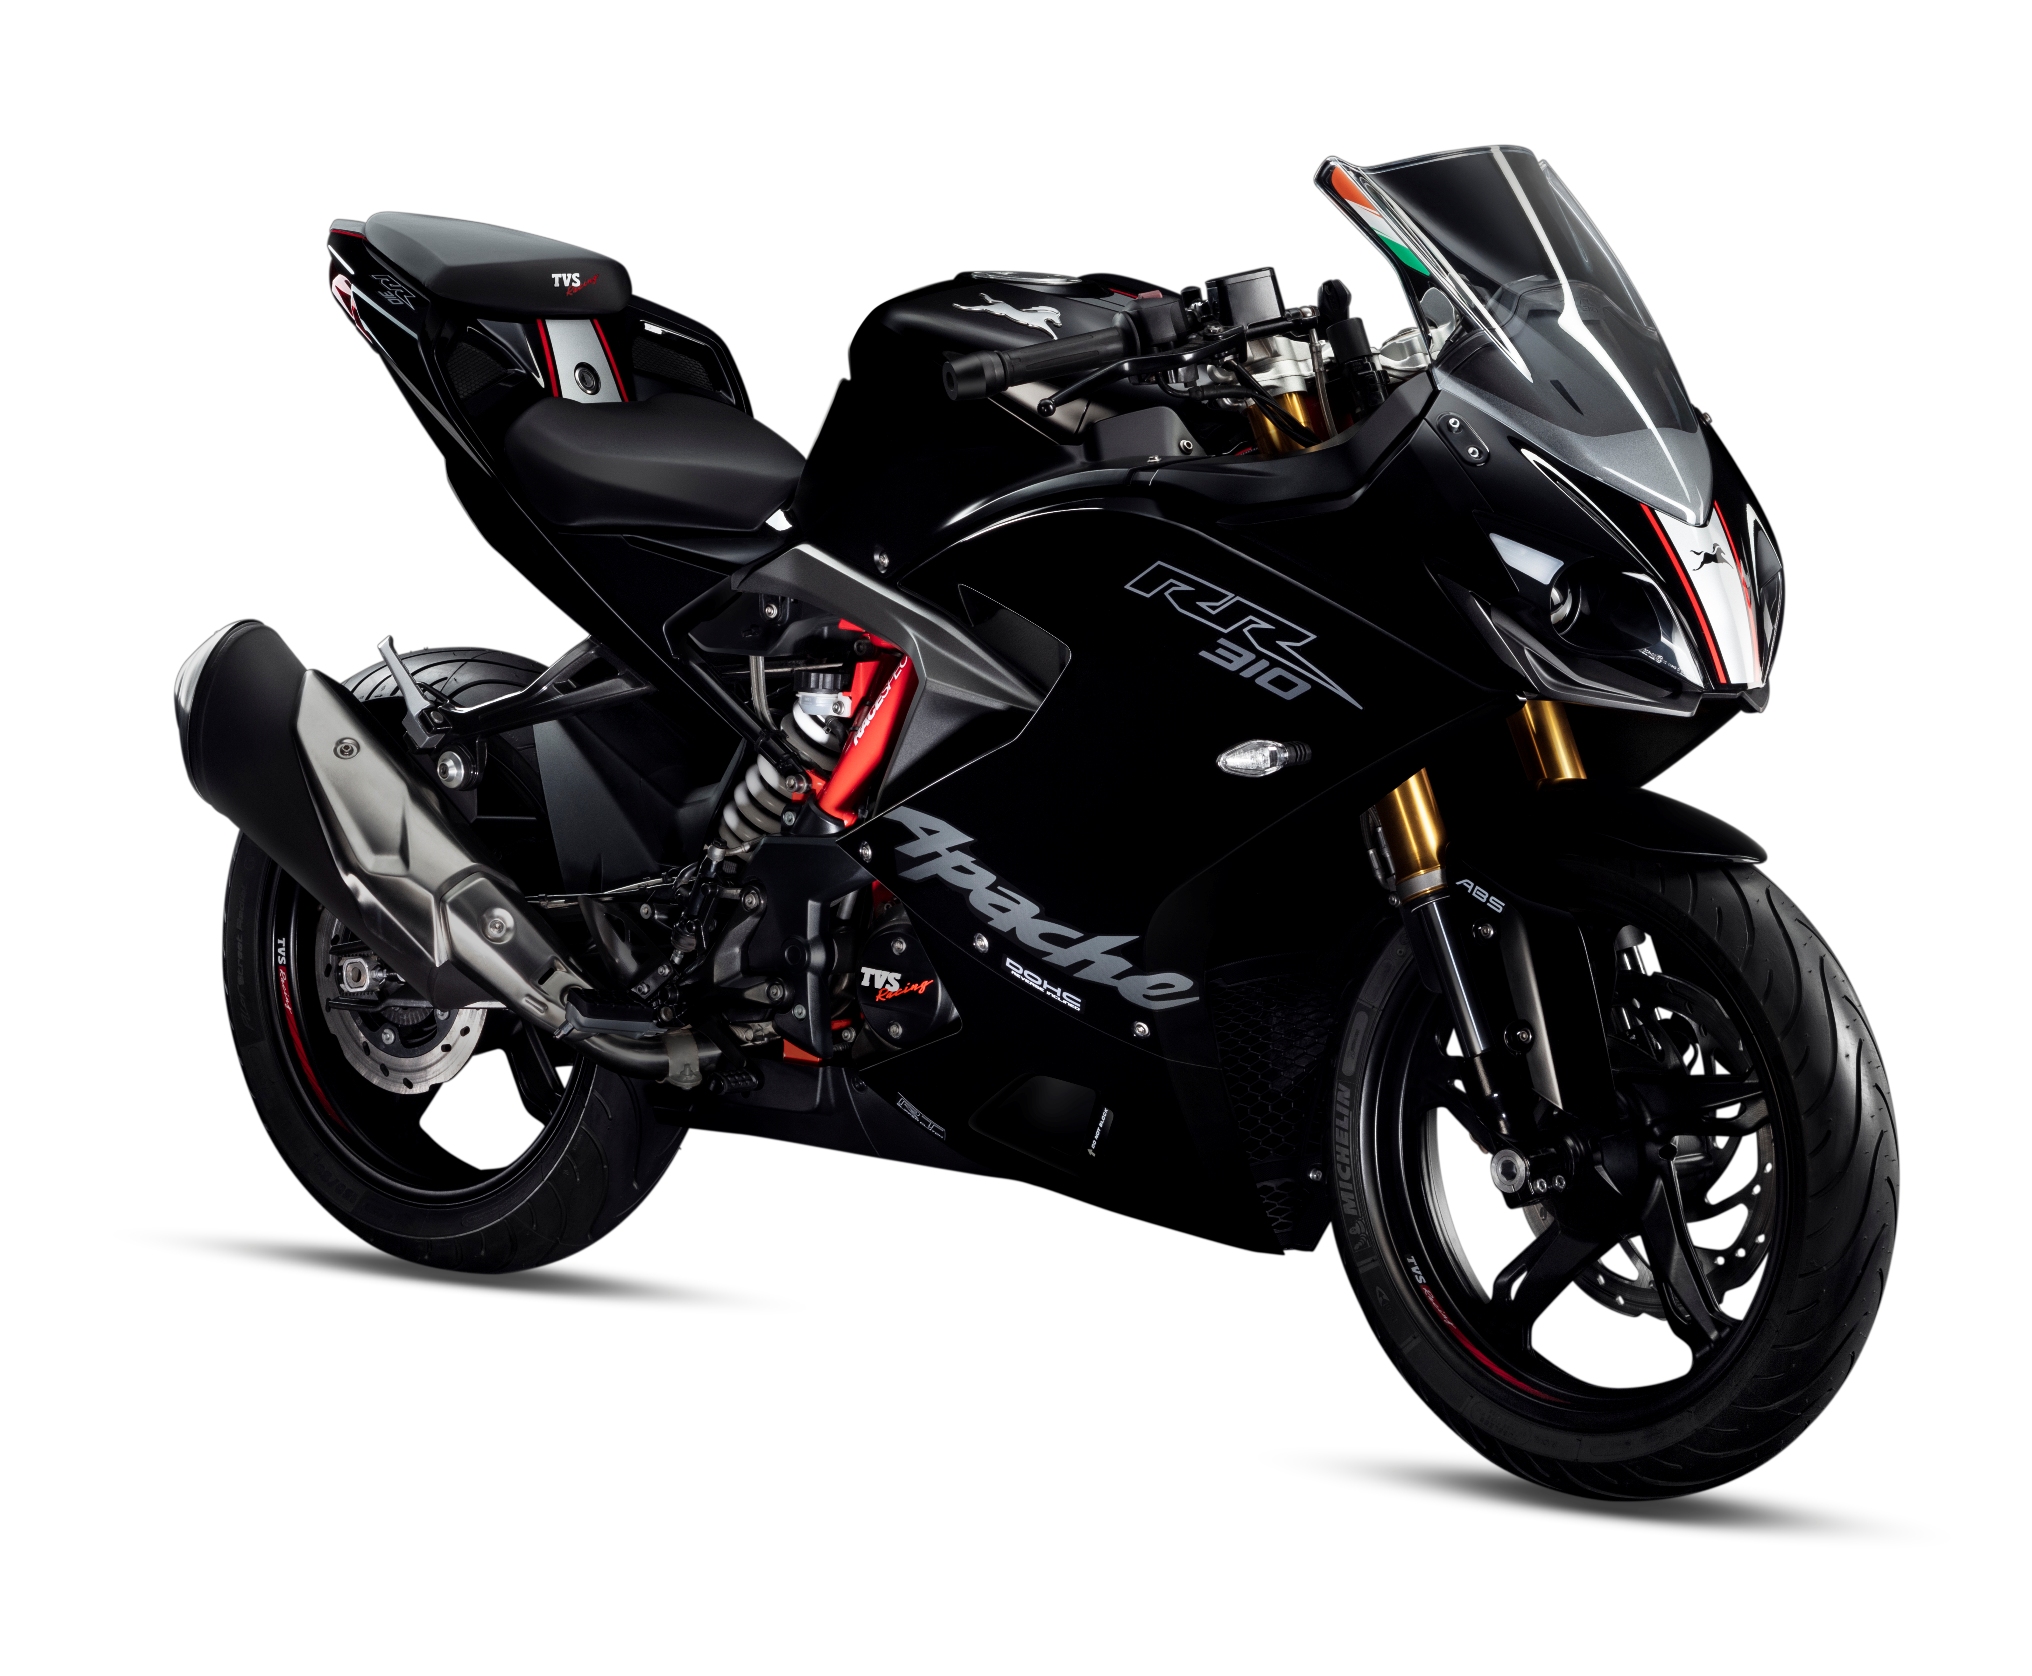 TVS Motor Company launches TVS Apache RR 310 and TVS NTORQ 125 in the Philippines